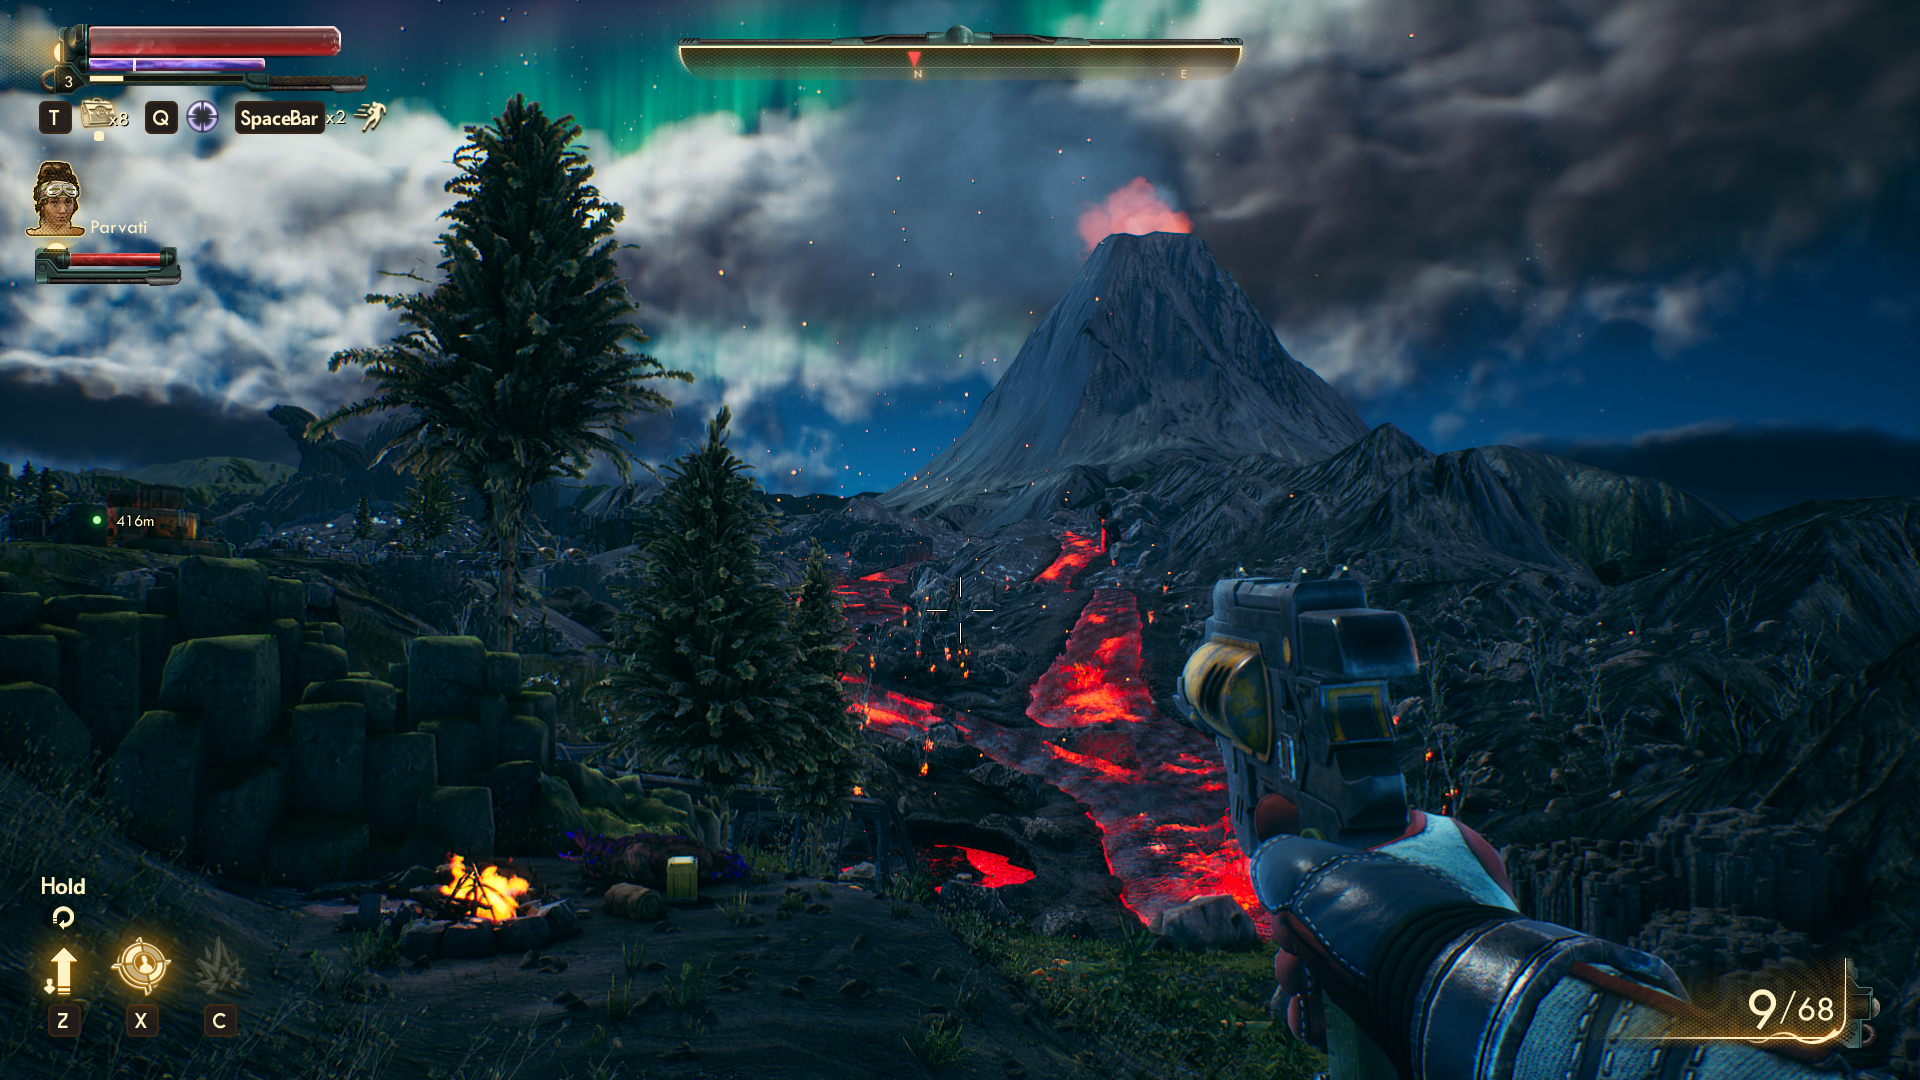 Looking out over flowing lava in a night time scene from The Outer Worlds.